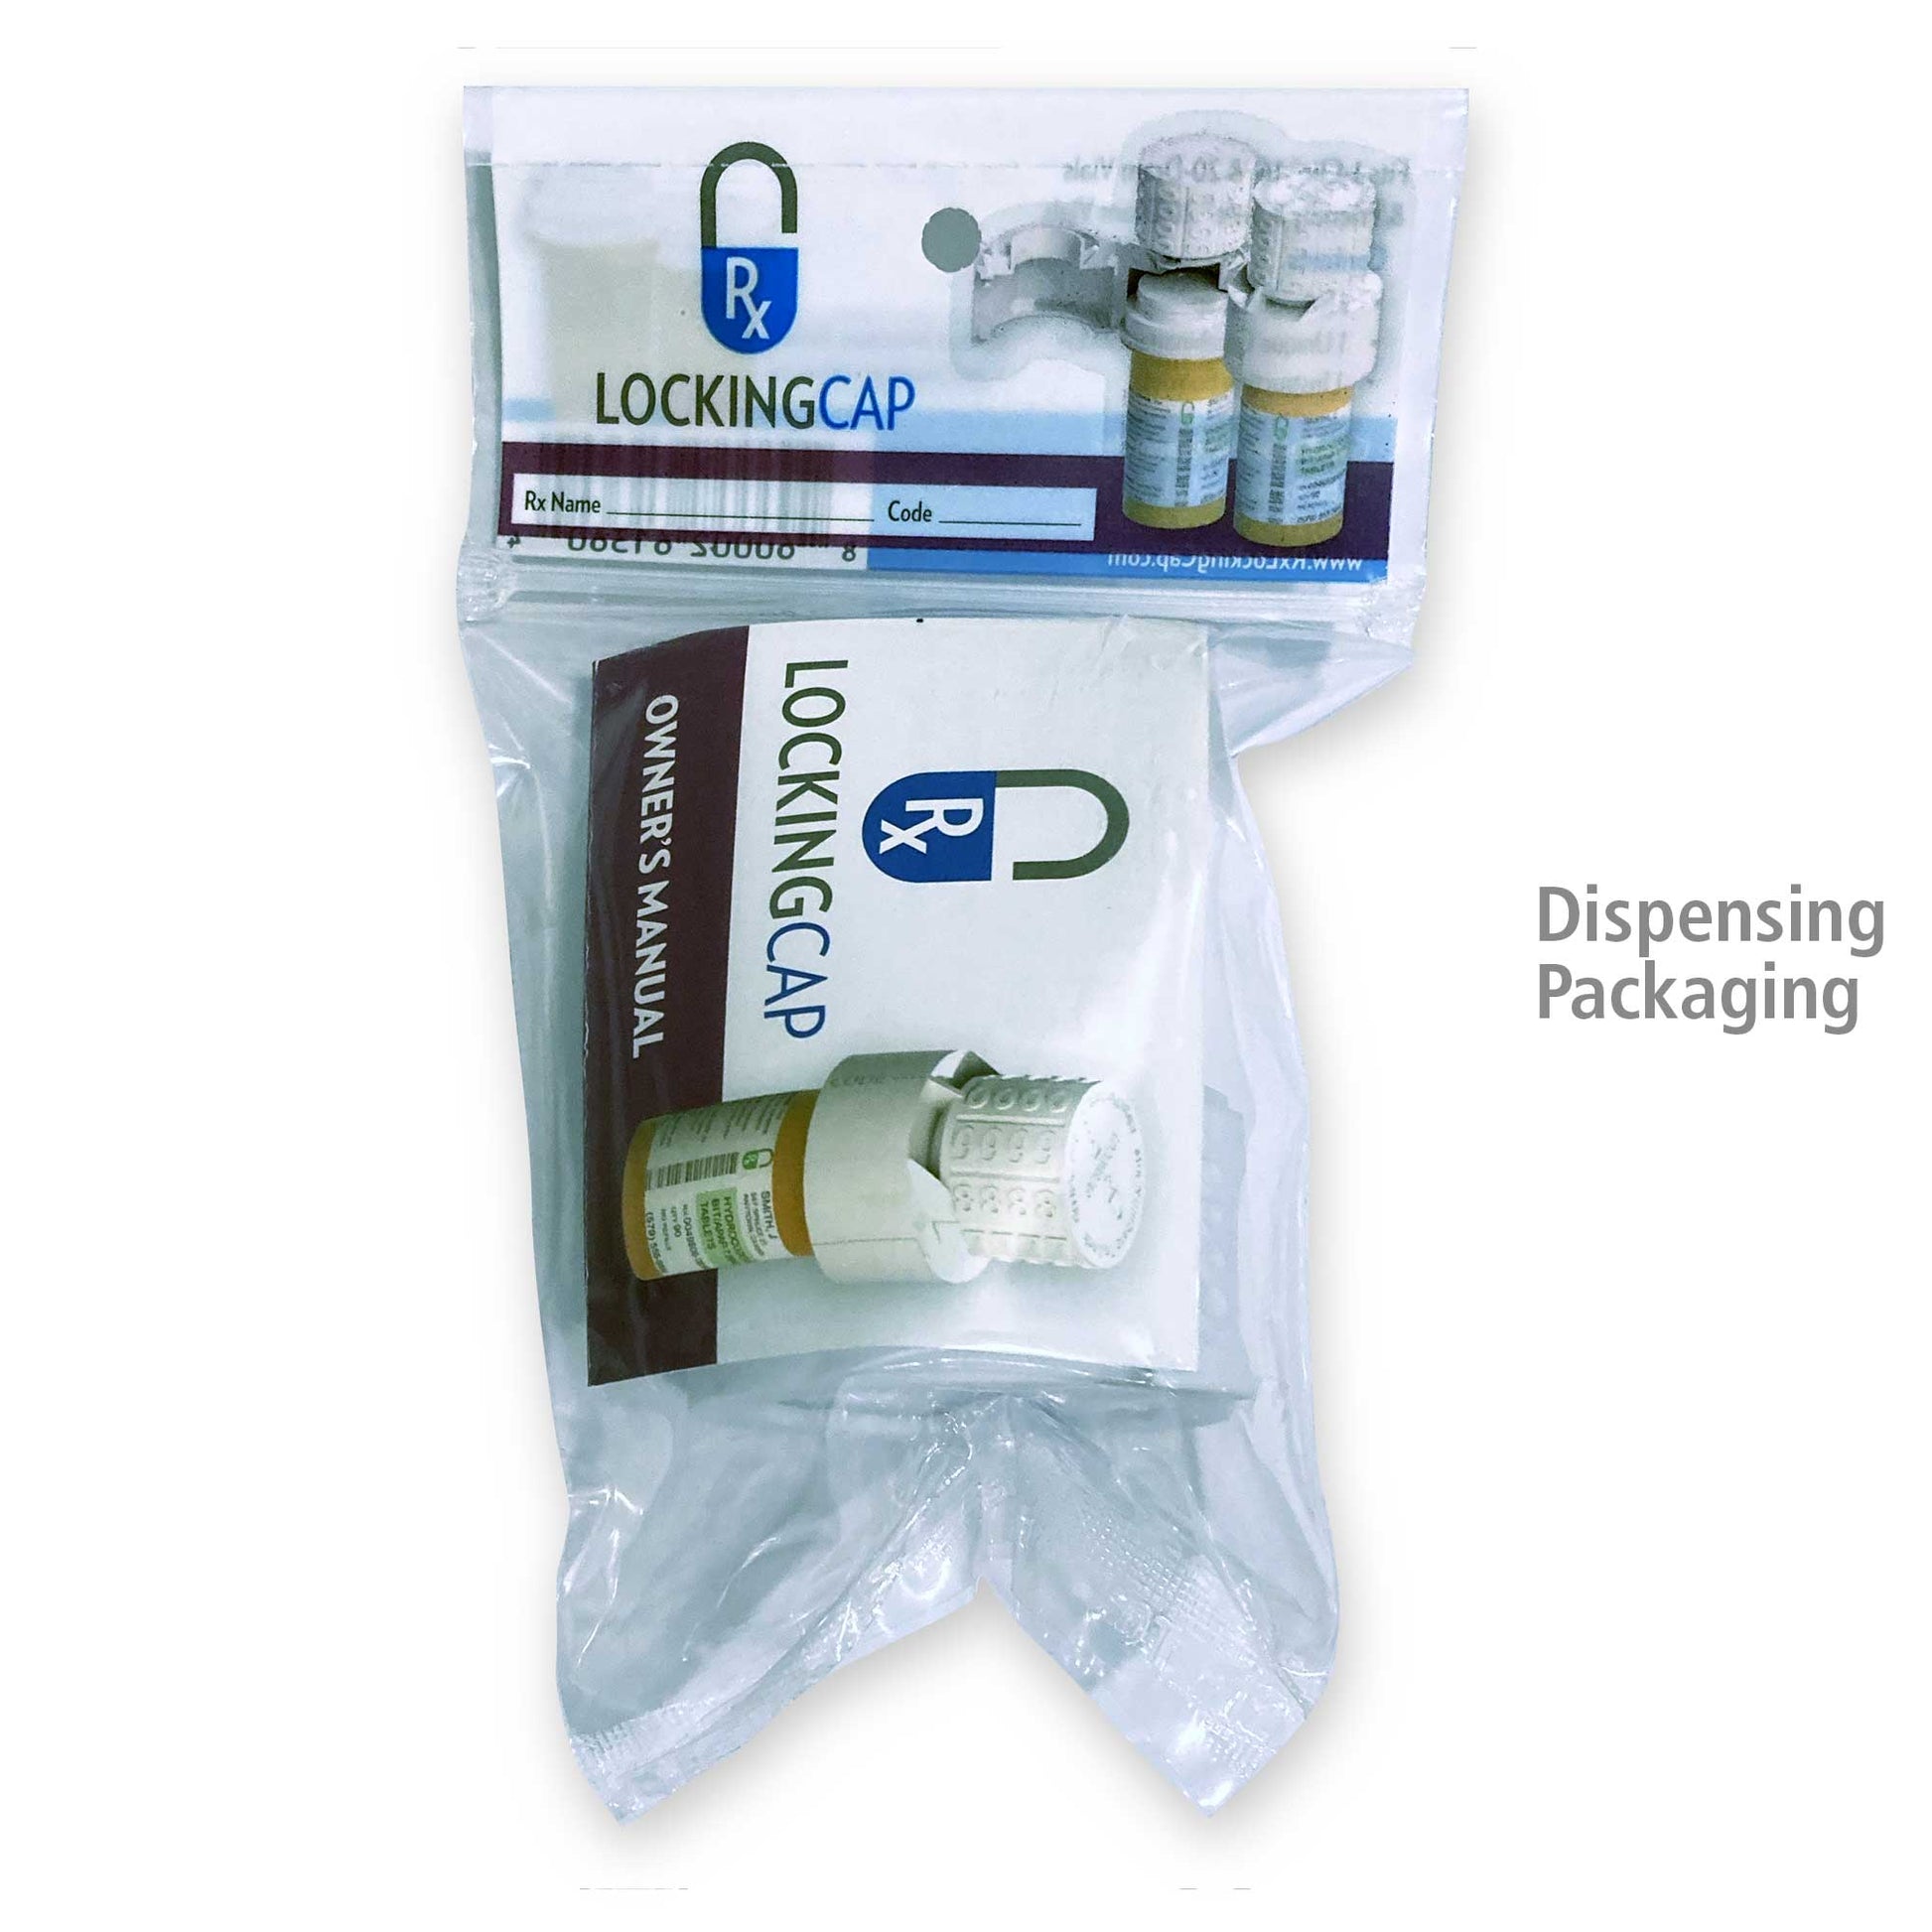 A plastic bag with the "Rx Locking Cap" logo at the top. The bag contains the Rx Locking Cap owner's manual and product. Text reads "Dispensing Packaging." 